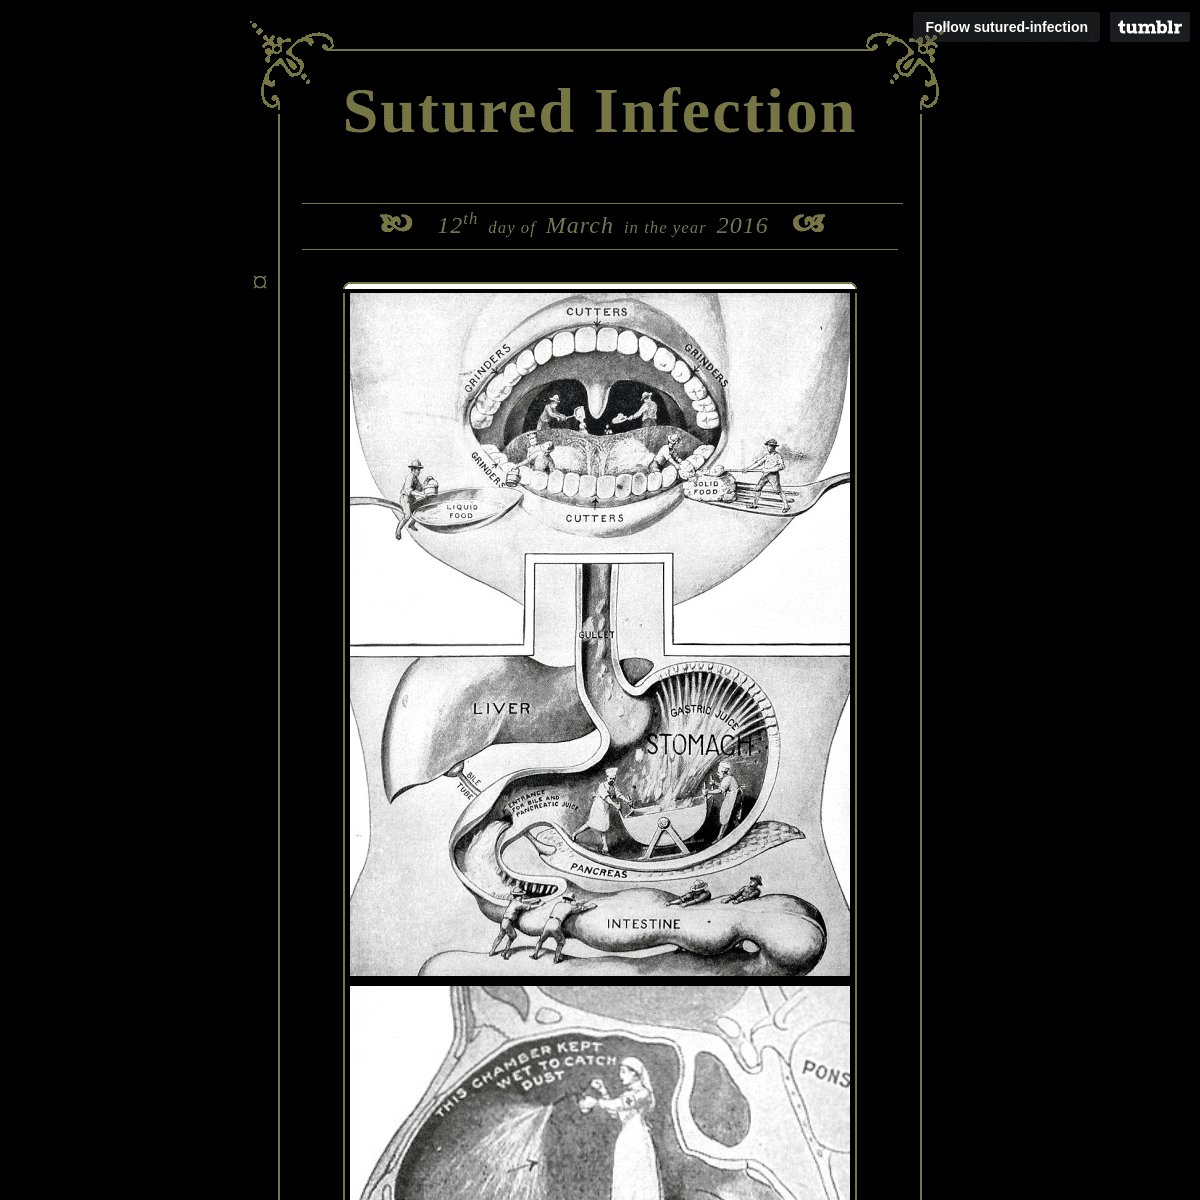 A complete backup of sutured-infection.tumblr.com